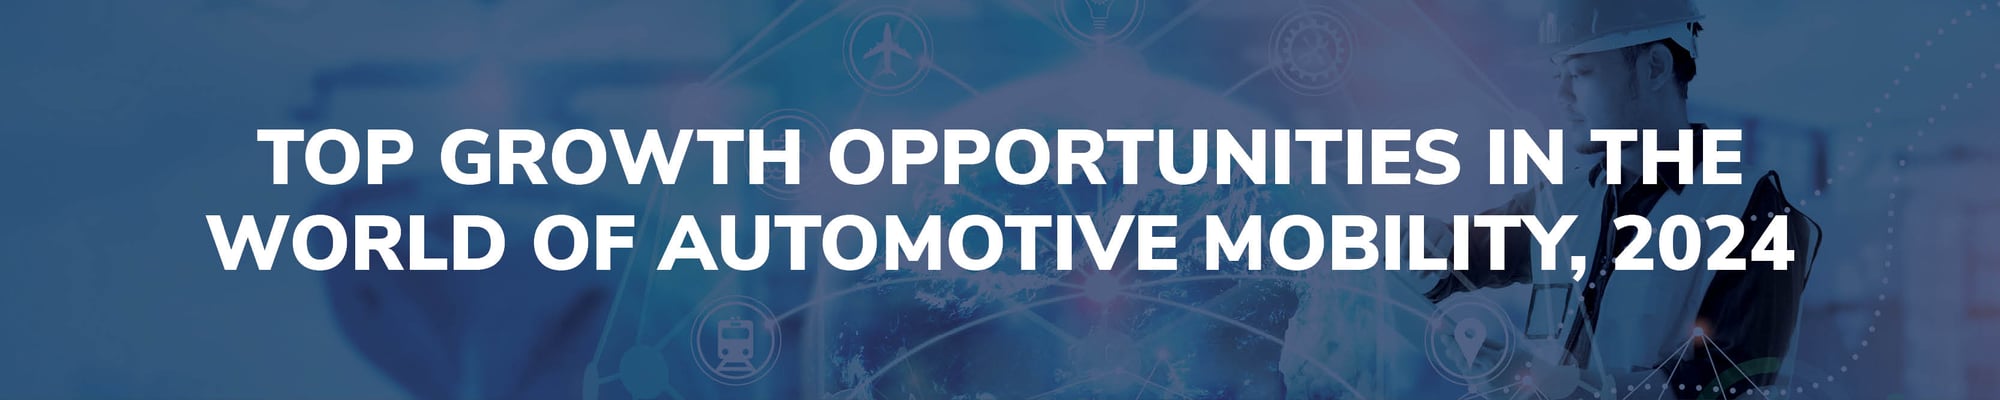 Top Growth Opportunities in The World of Automotive Mobility, 2024